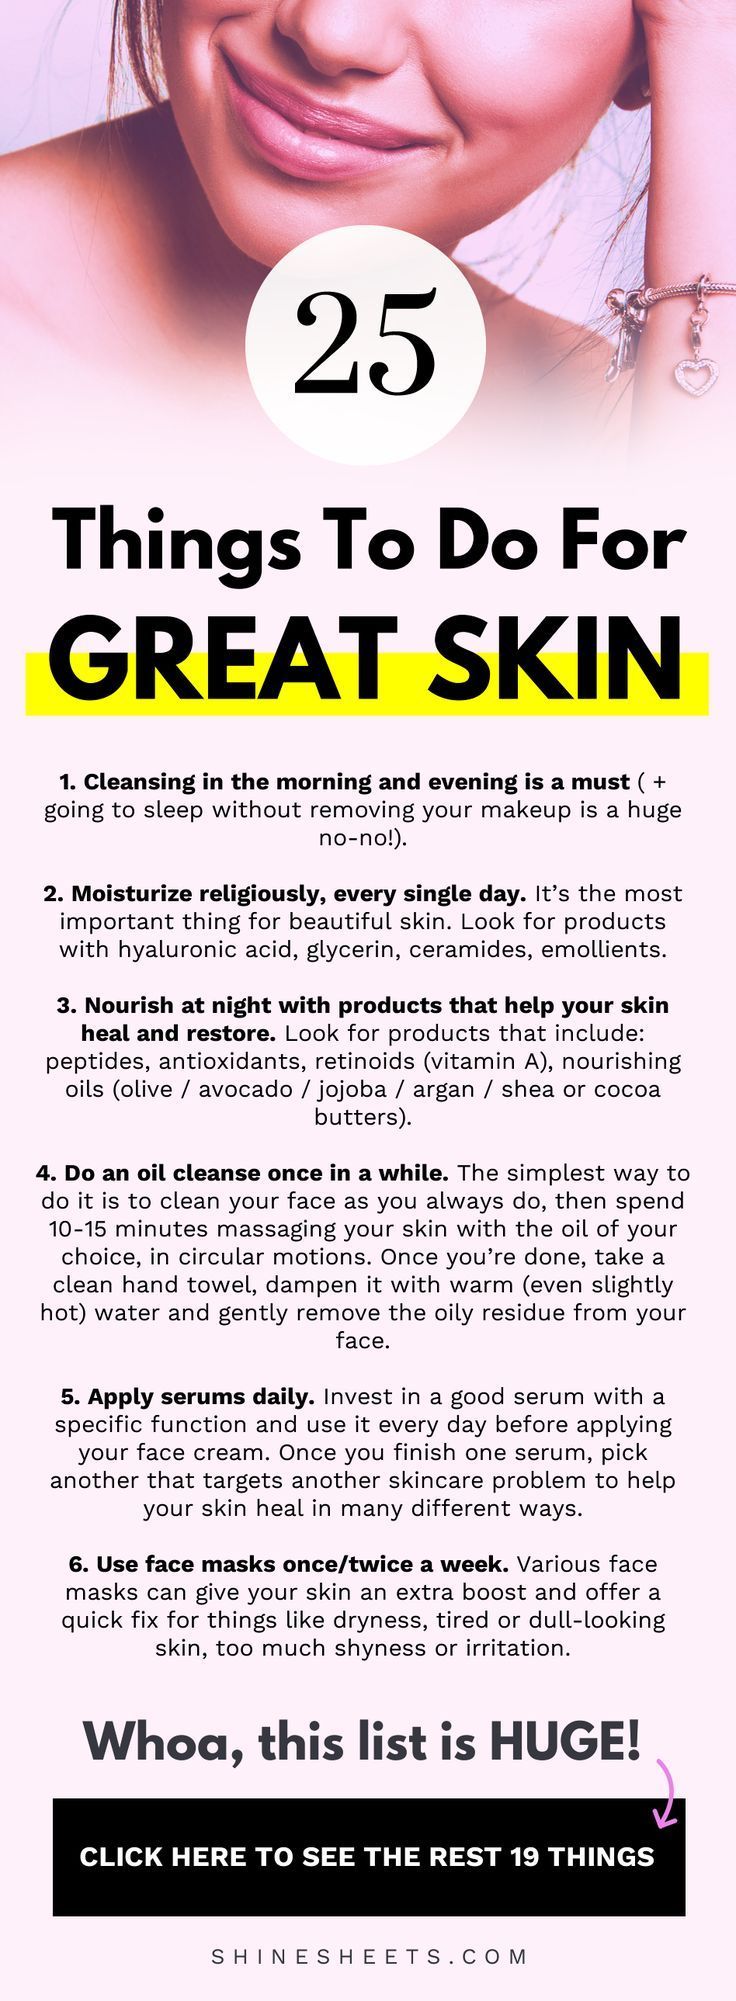 25 Things To Do For Stunning Skin | ShineSheets - 25 Things To Do For Stunning Skin | ShineSheets -   18 skincare beauty Secrets ideas